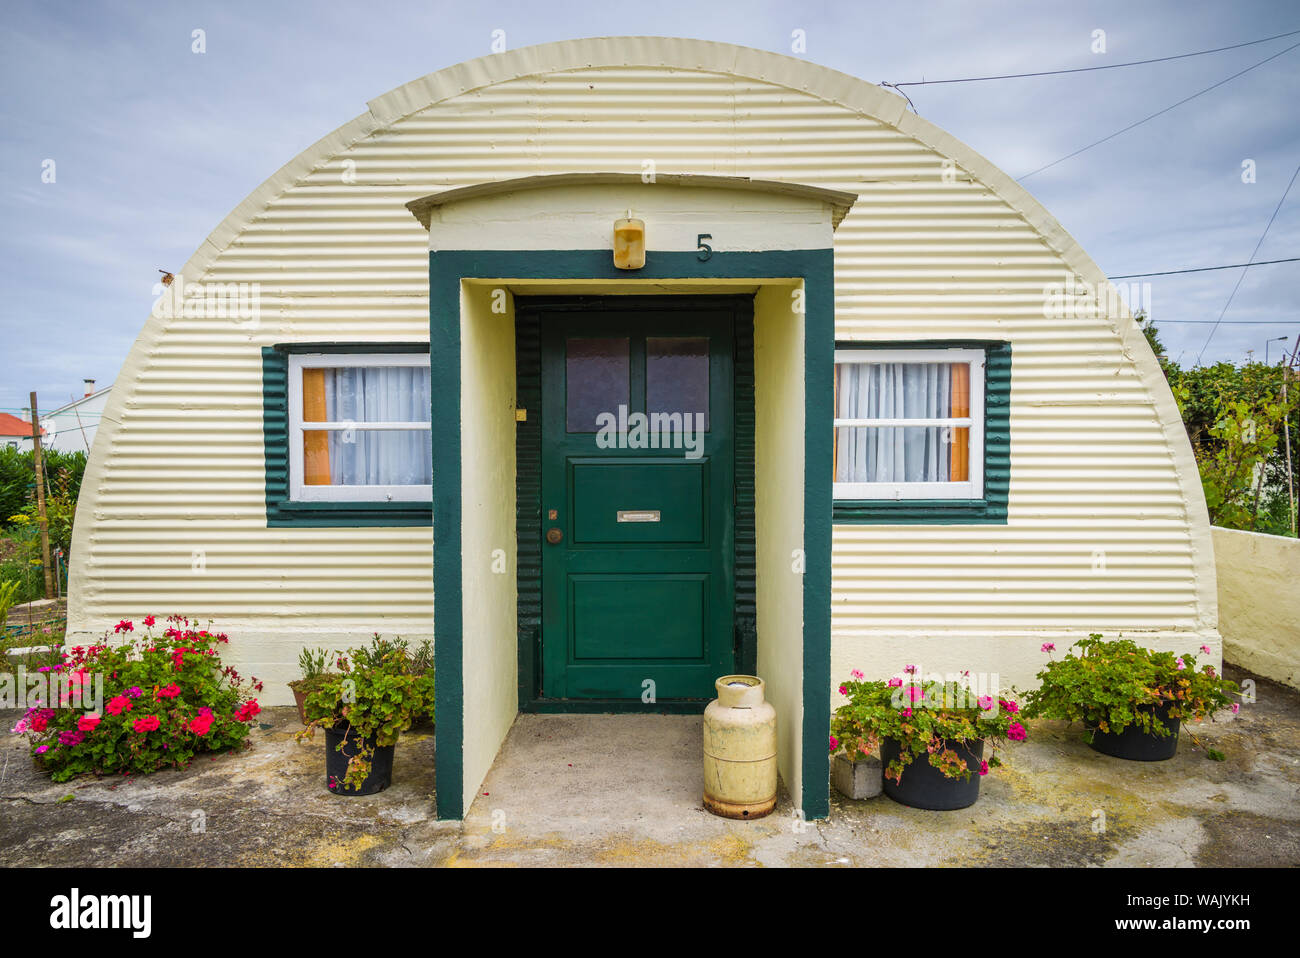 Hut Base High Resolution Stock Photography and Images - Alamy